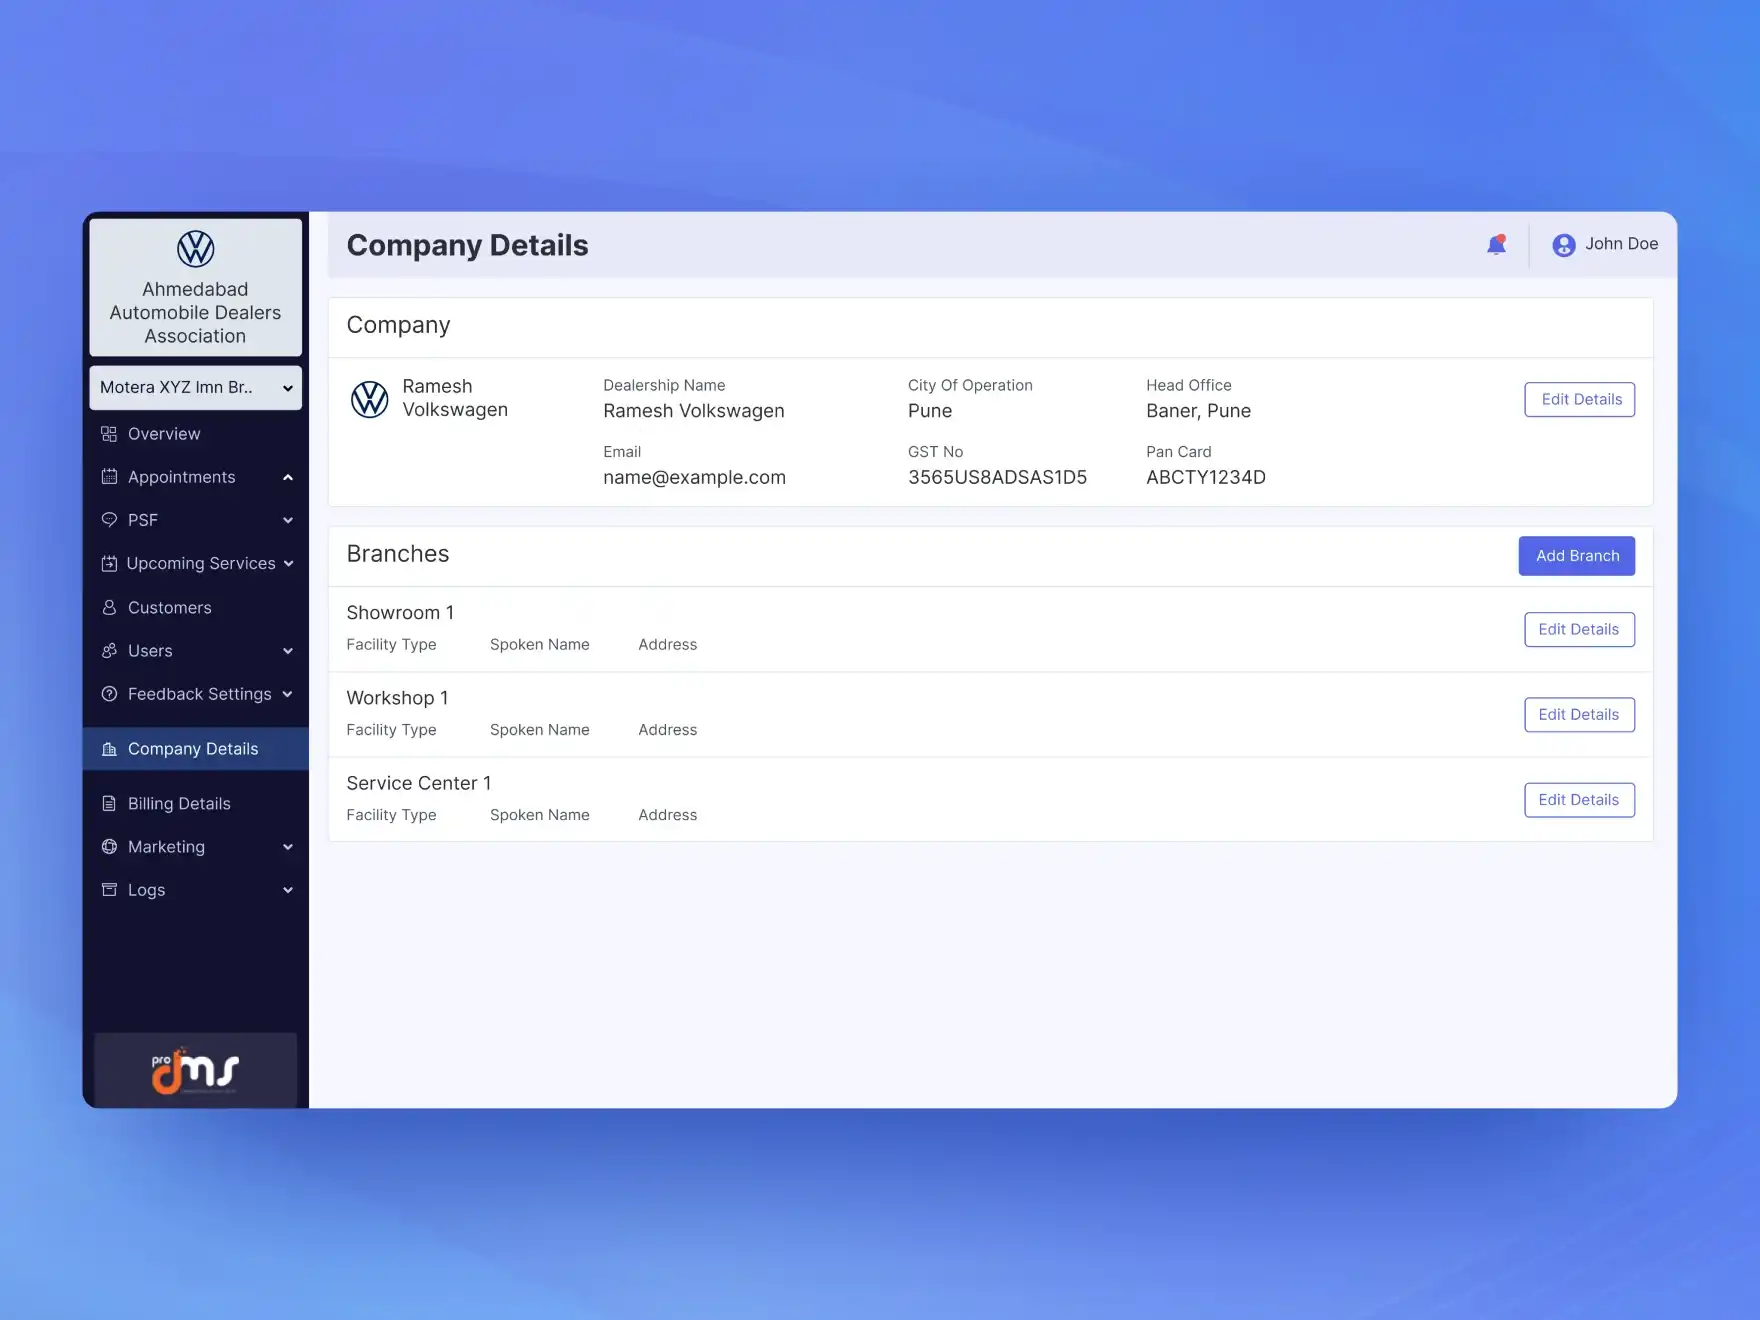 UI UX Screen to View Company Details